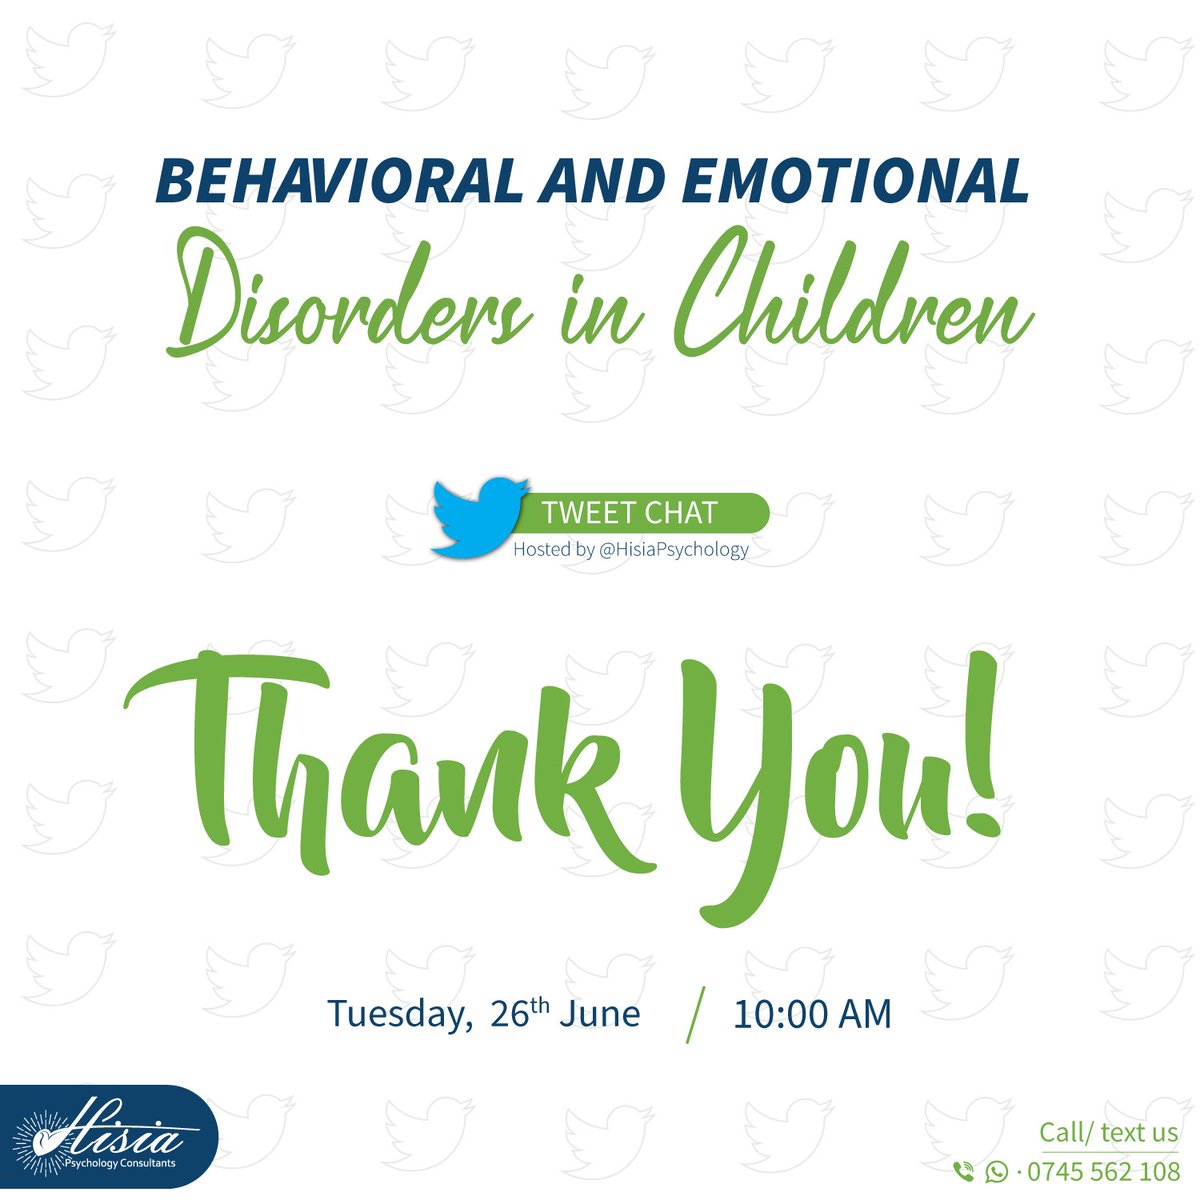 And that's a wrap for this week's conversation. Massive thanks to our experts this week @RhodahKariuki2, @emanuelayieko_o, @grace_sybille (who agreed to participate on her birthday) & @katewamuyuk for sharing their knowledge and time with us

#BetterParenting #ChildTherapy